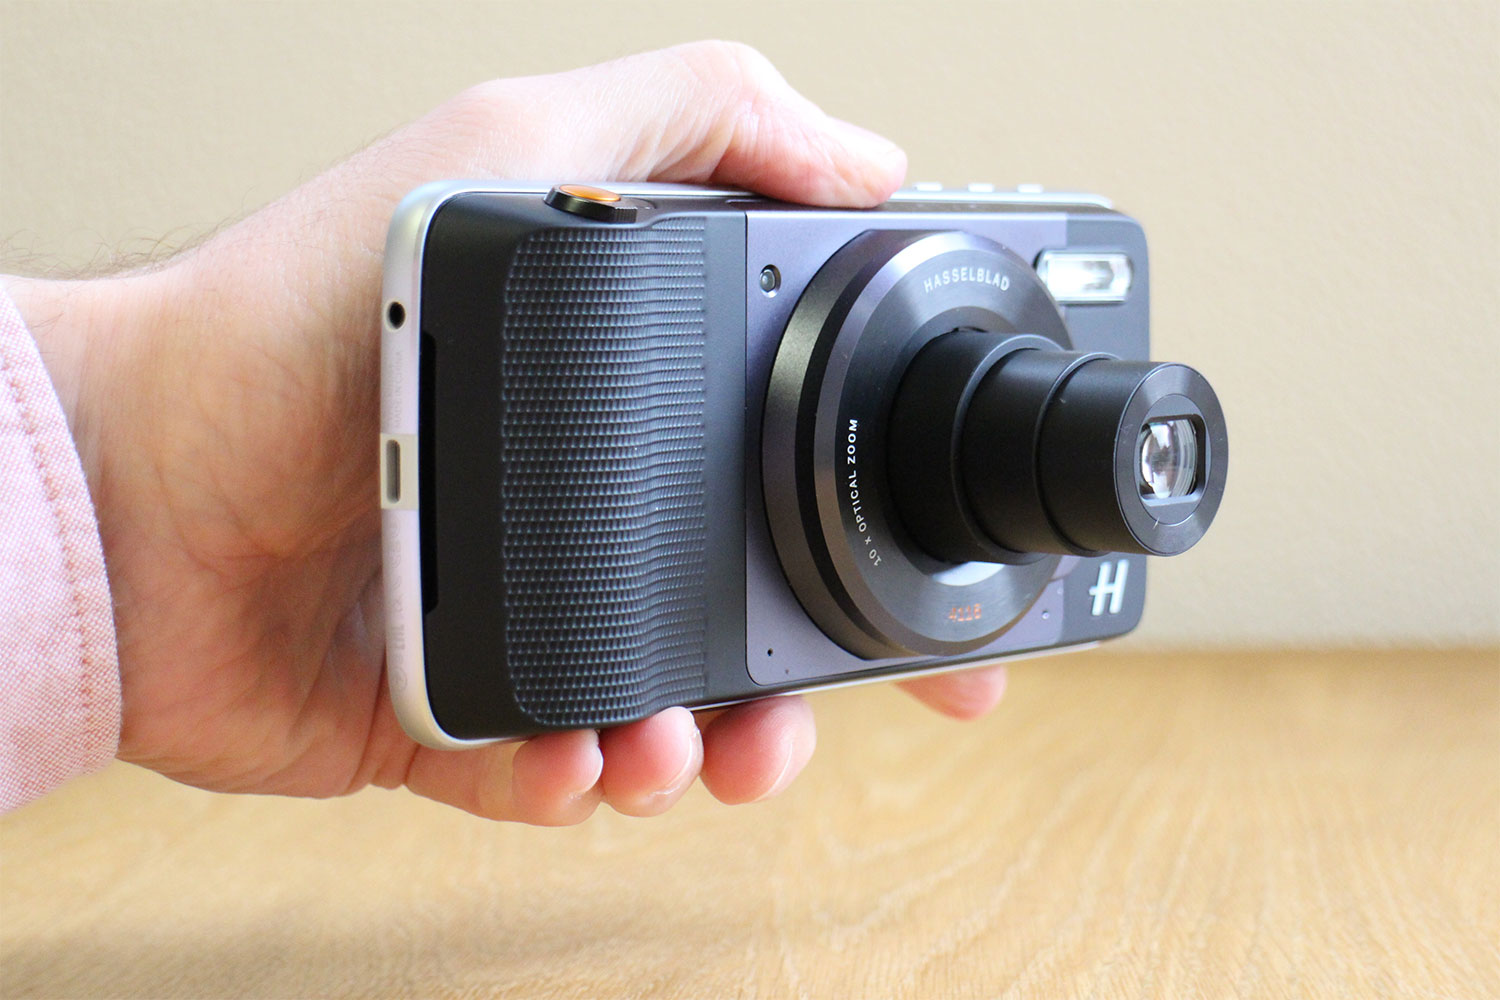 The Hasselblad True Zoom Moto Mod on a smartphone.